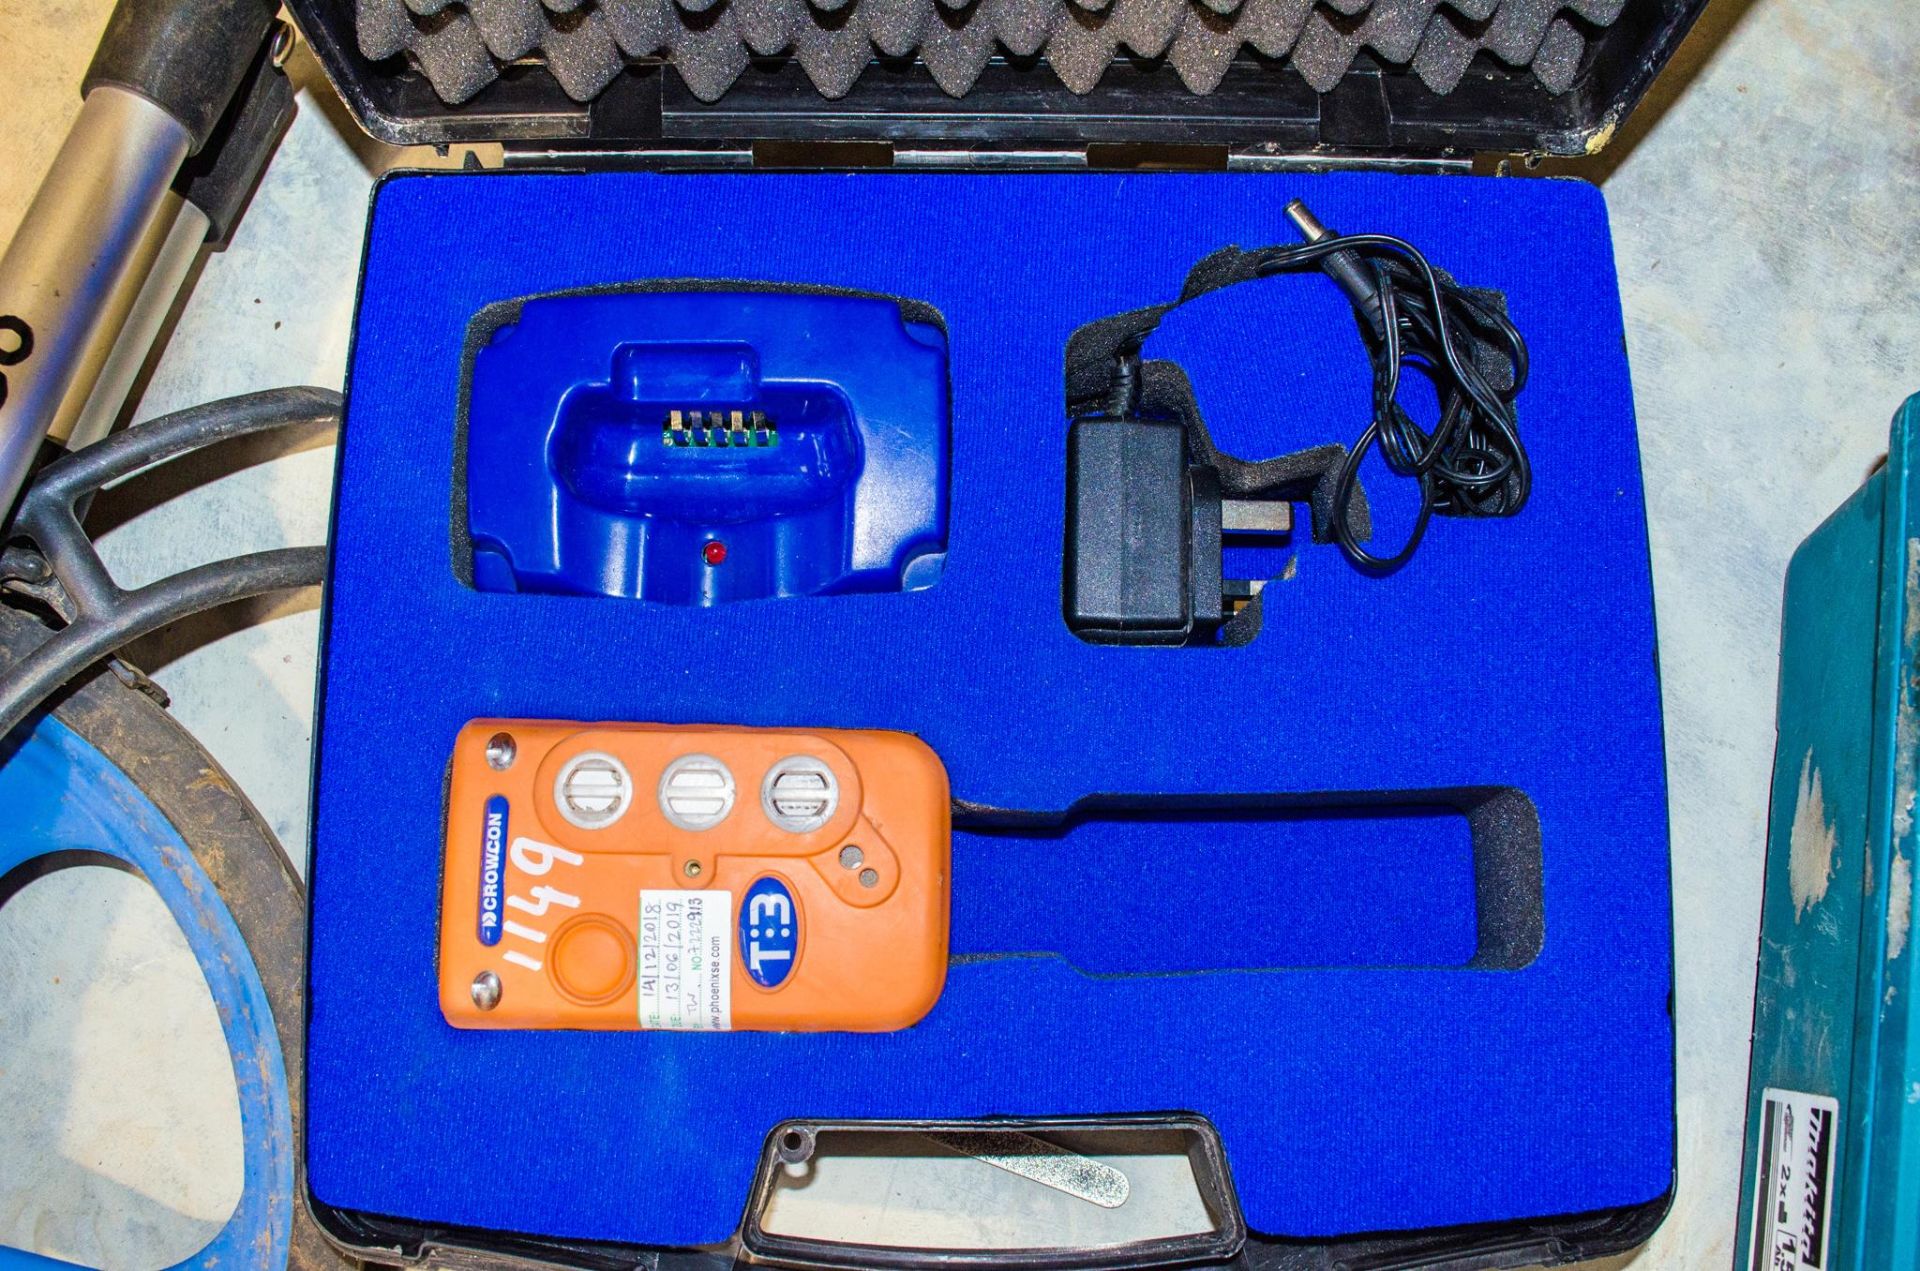 Crowcon gas detector kit c/w carry case